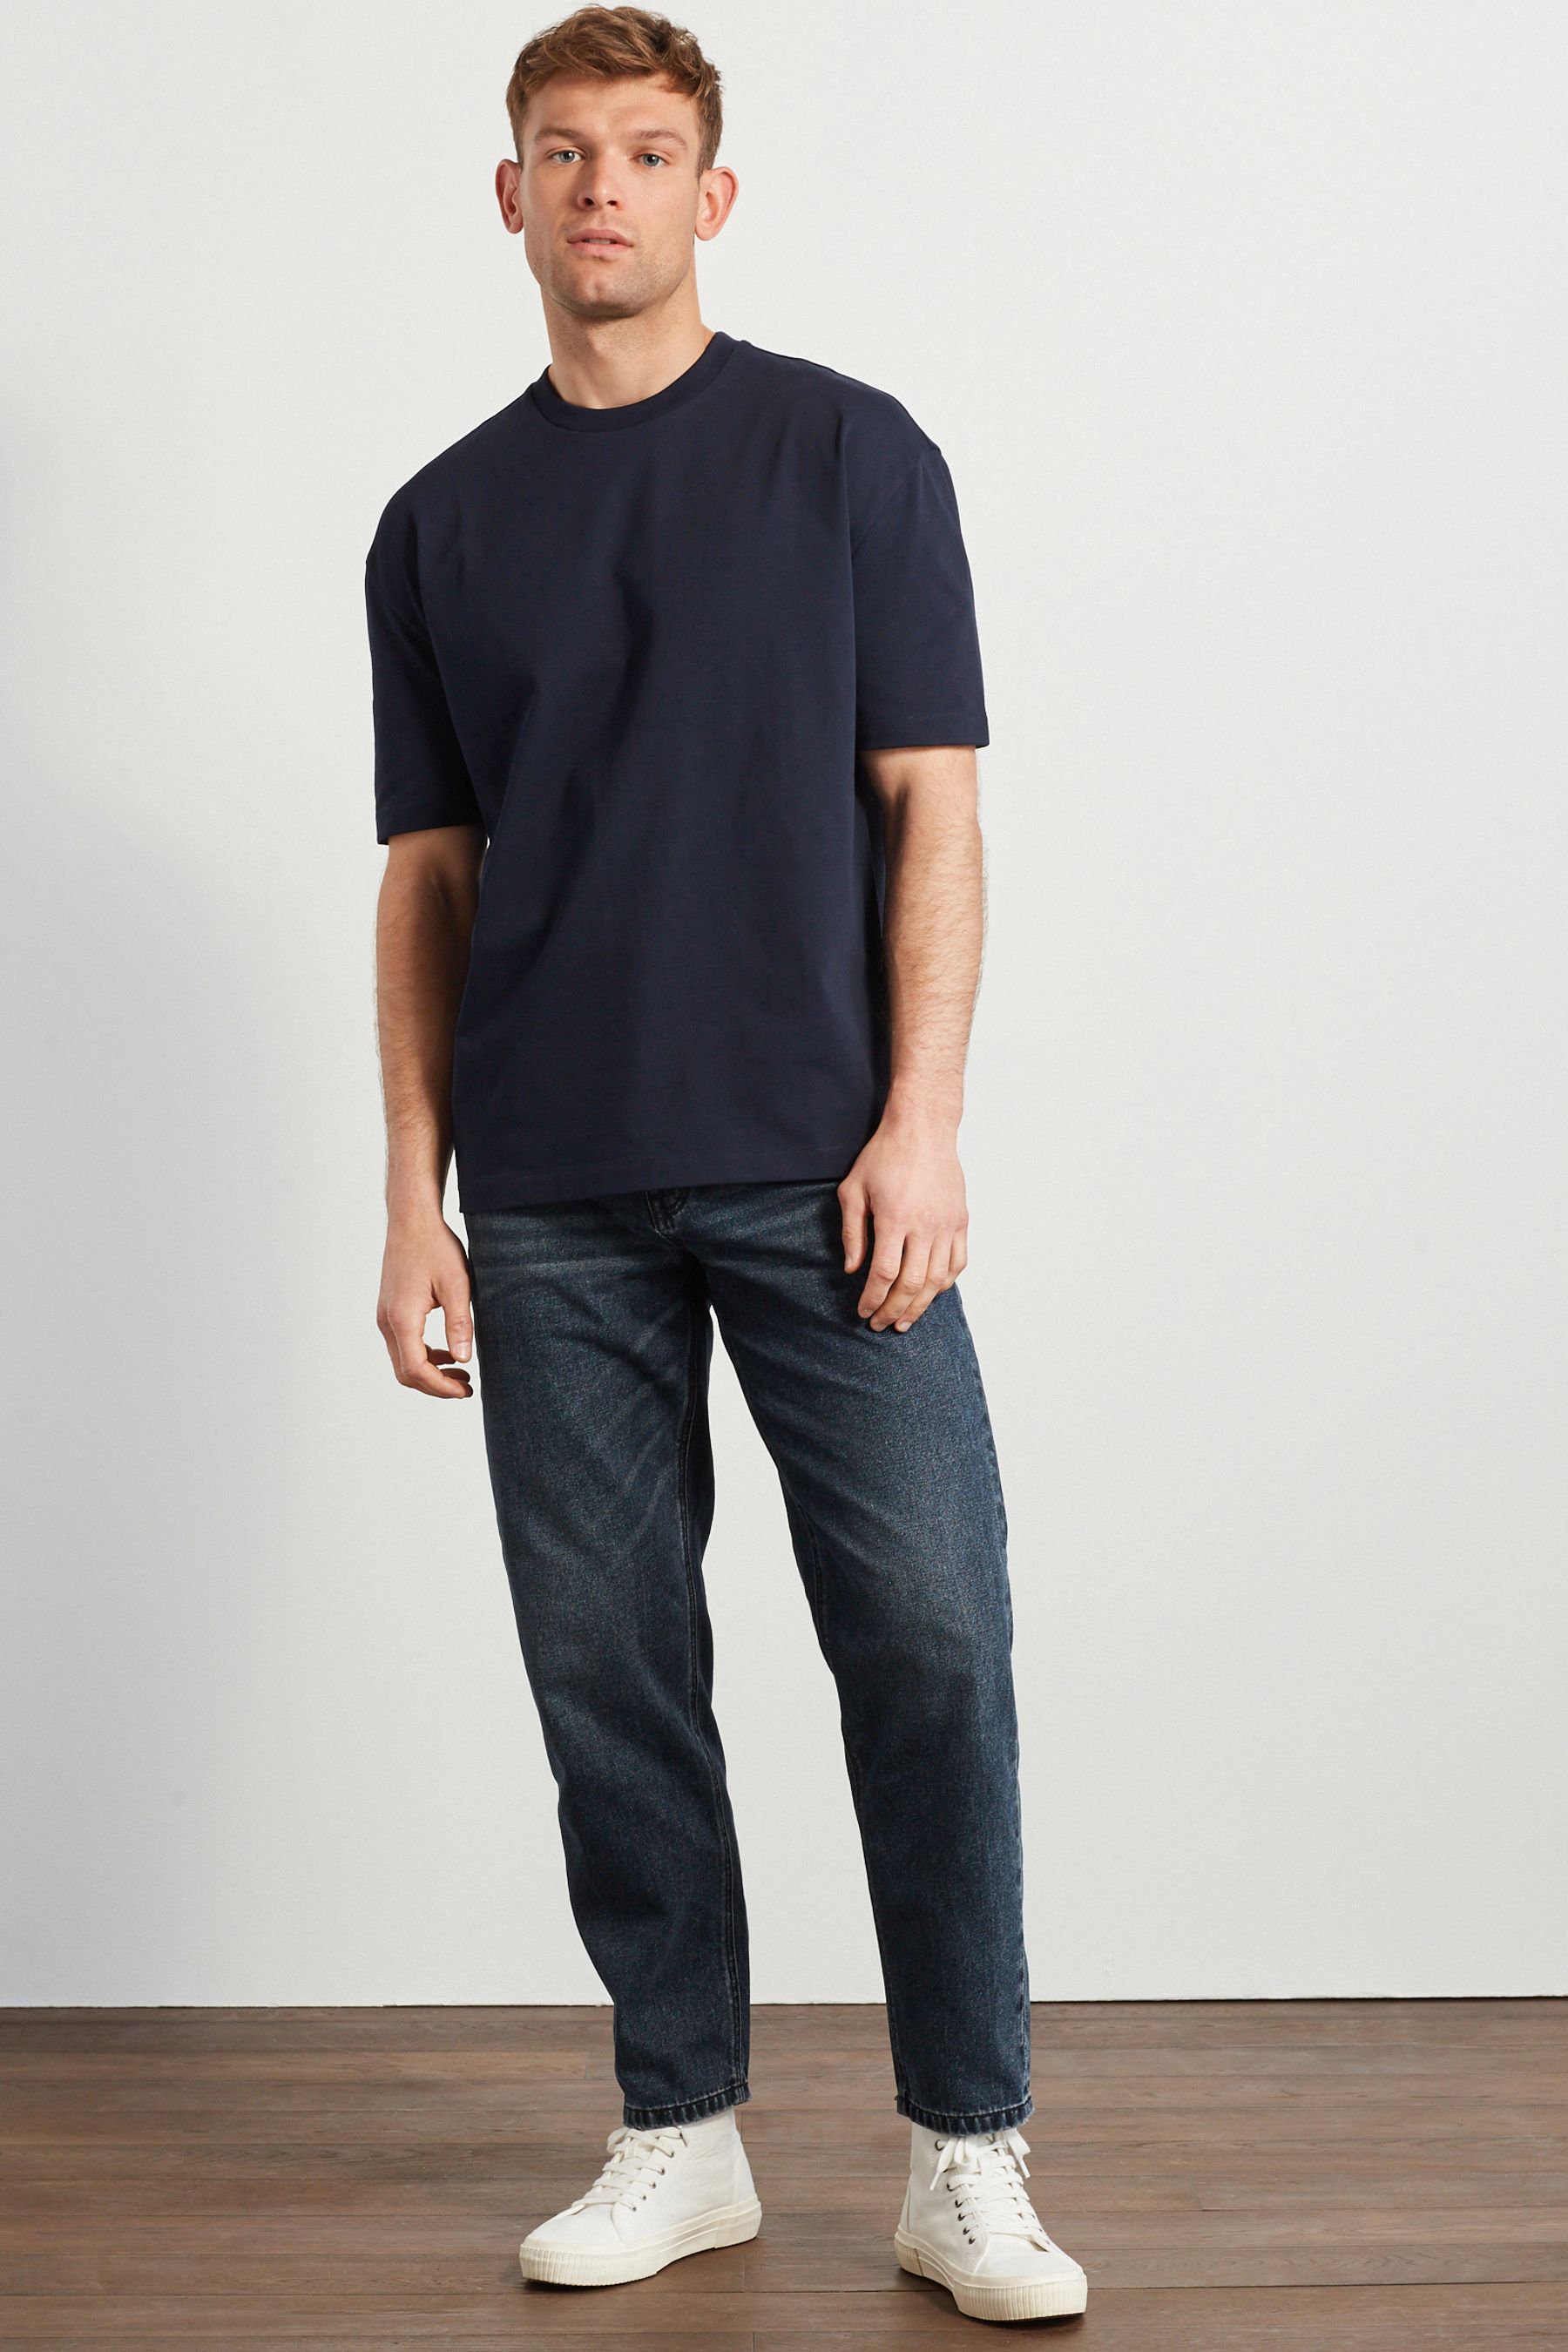 Buy Navy Blue Relaxed Heavyweight T-Shirt from the Next UK online shop